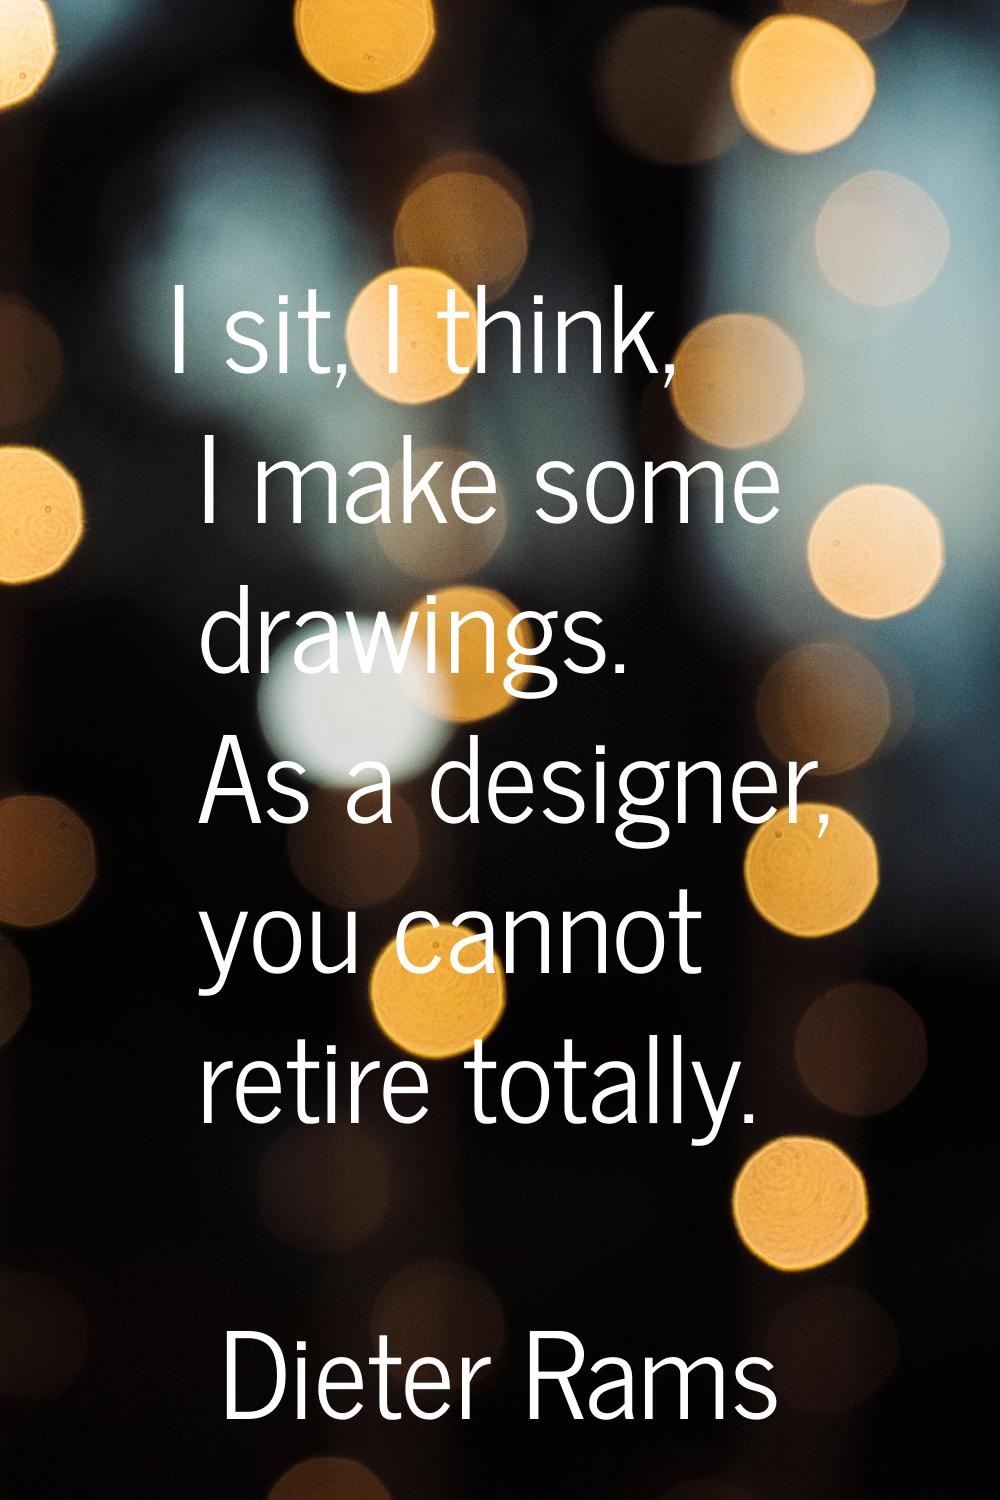 I sit, I think, I make some drawings. As a designer, you cannot retire totally.